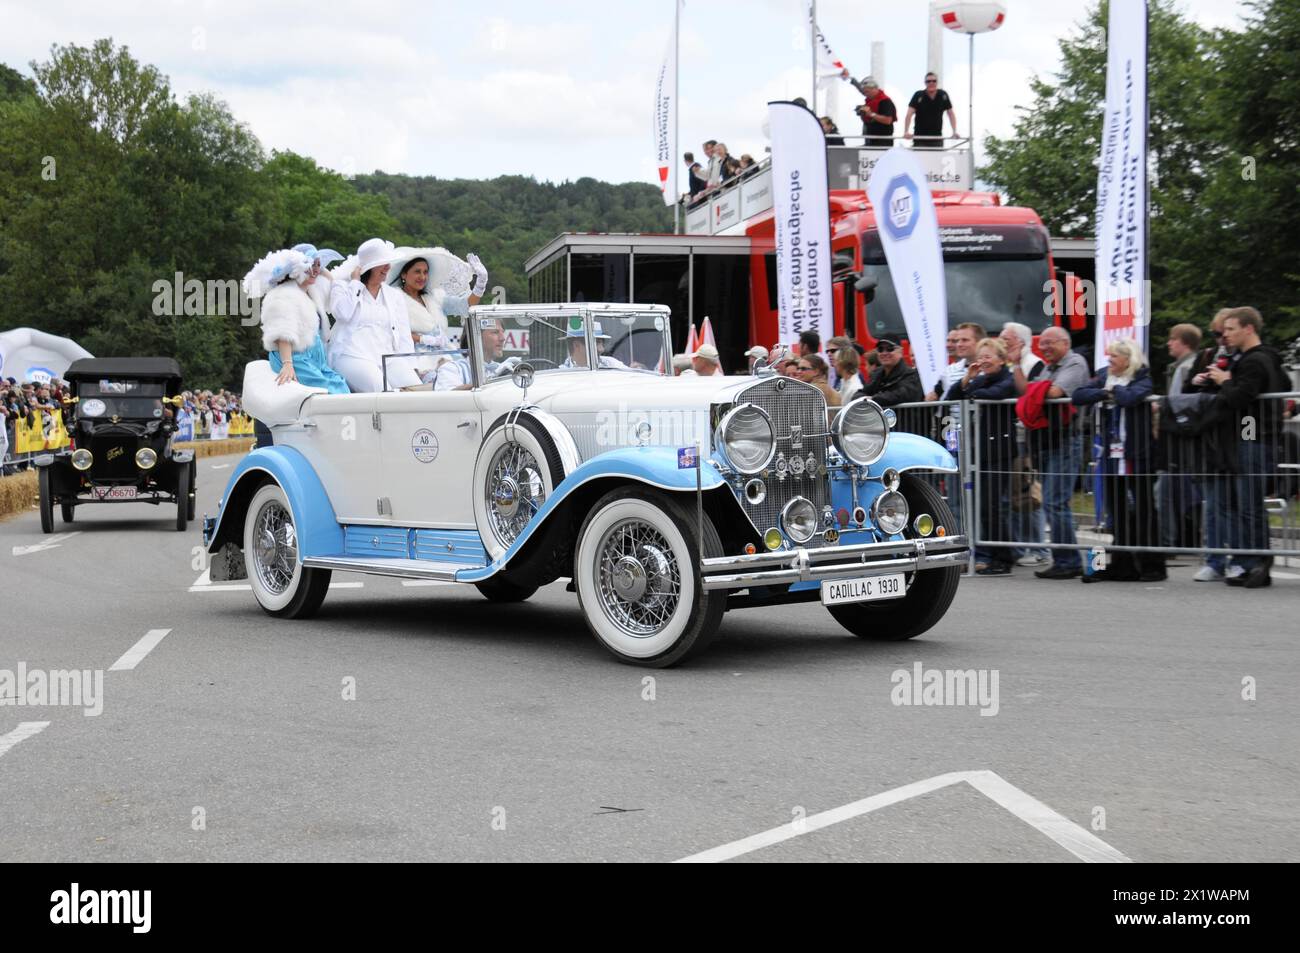 Cadillac Imperial Phaeton, built in 1930, A white and blue convertible vintage car drives past an enthusiastic crowd of spectators, SOLITUDE REVIVAL Stock Photo